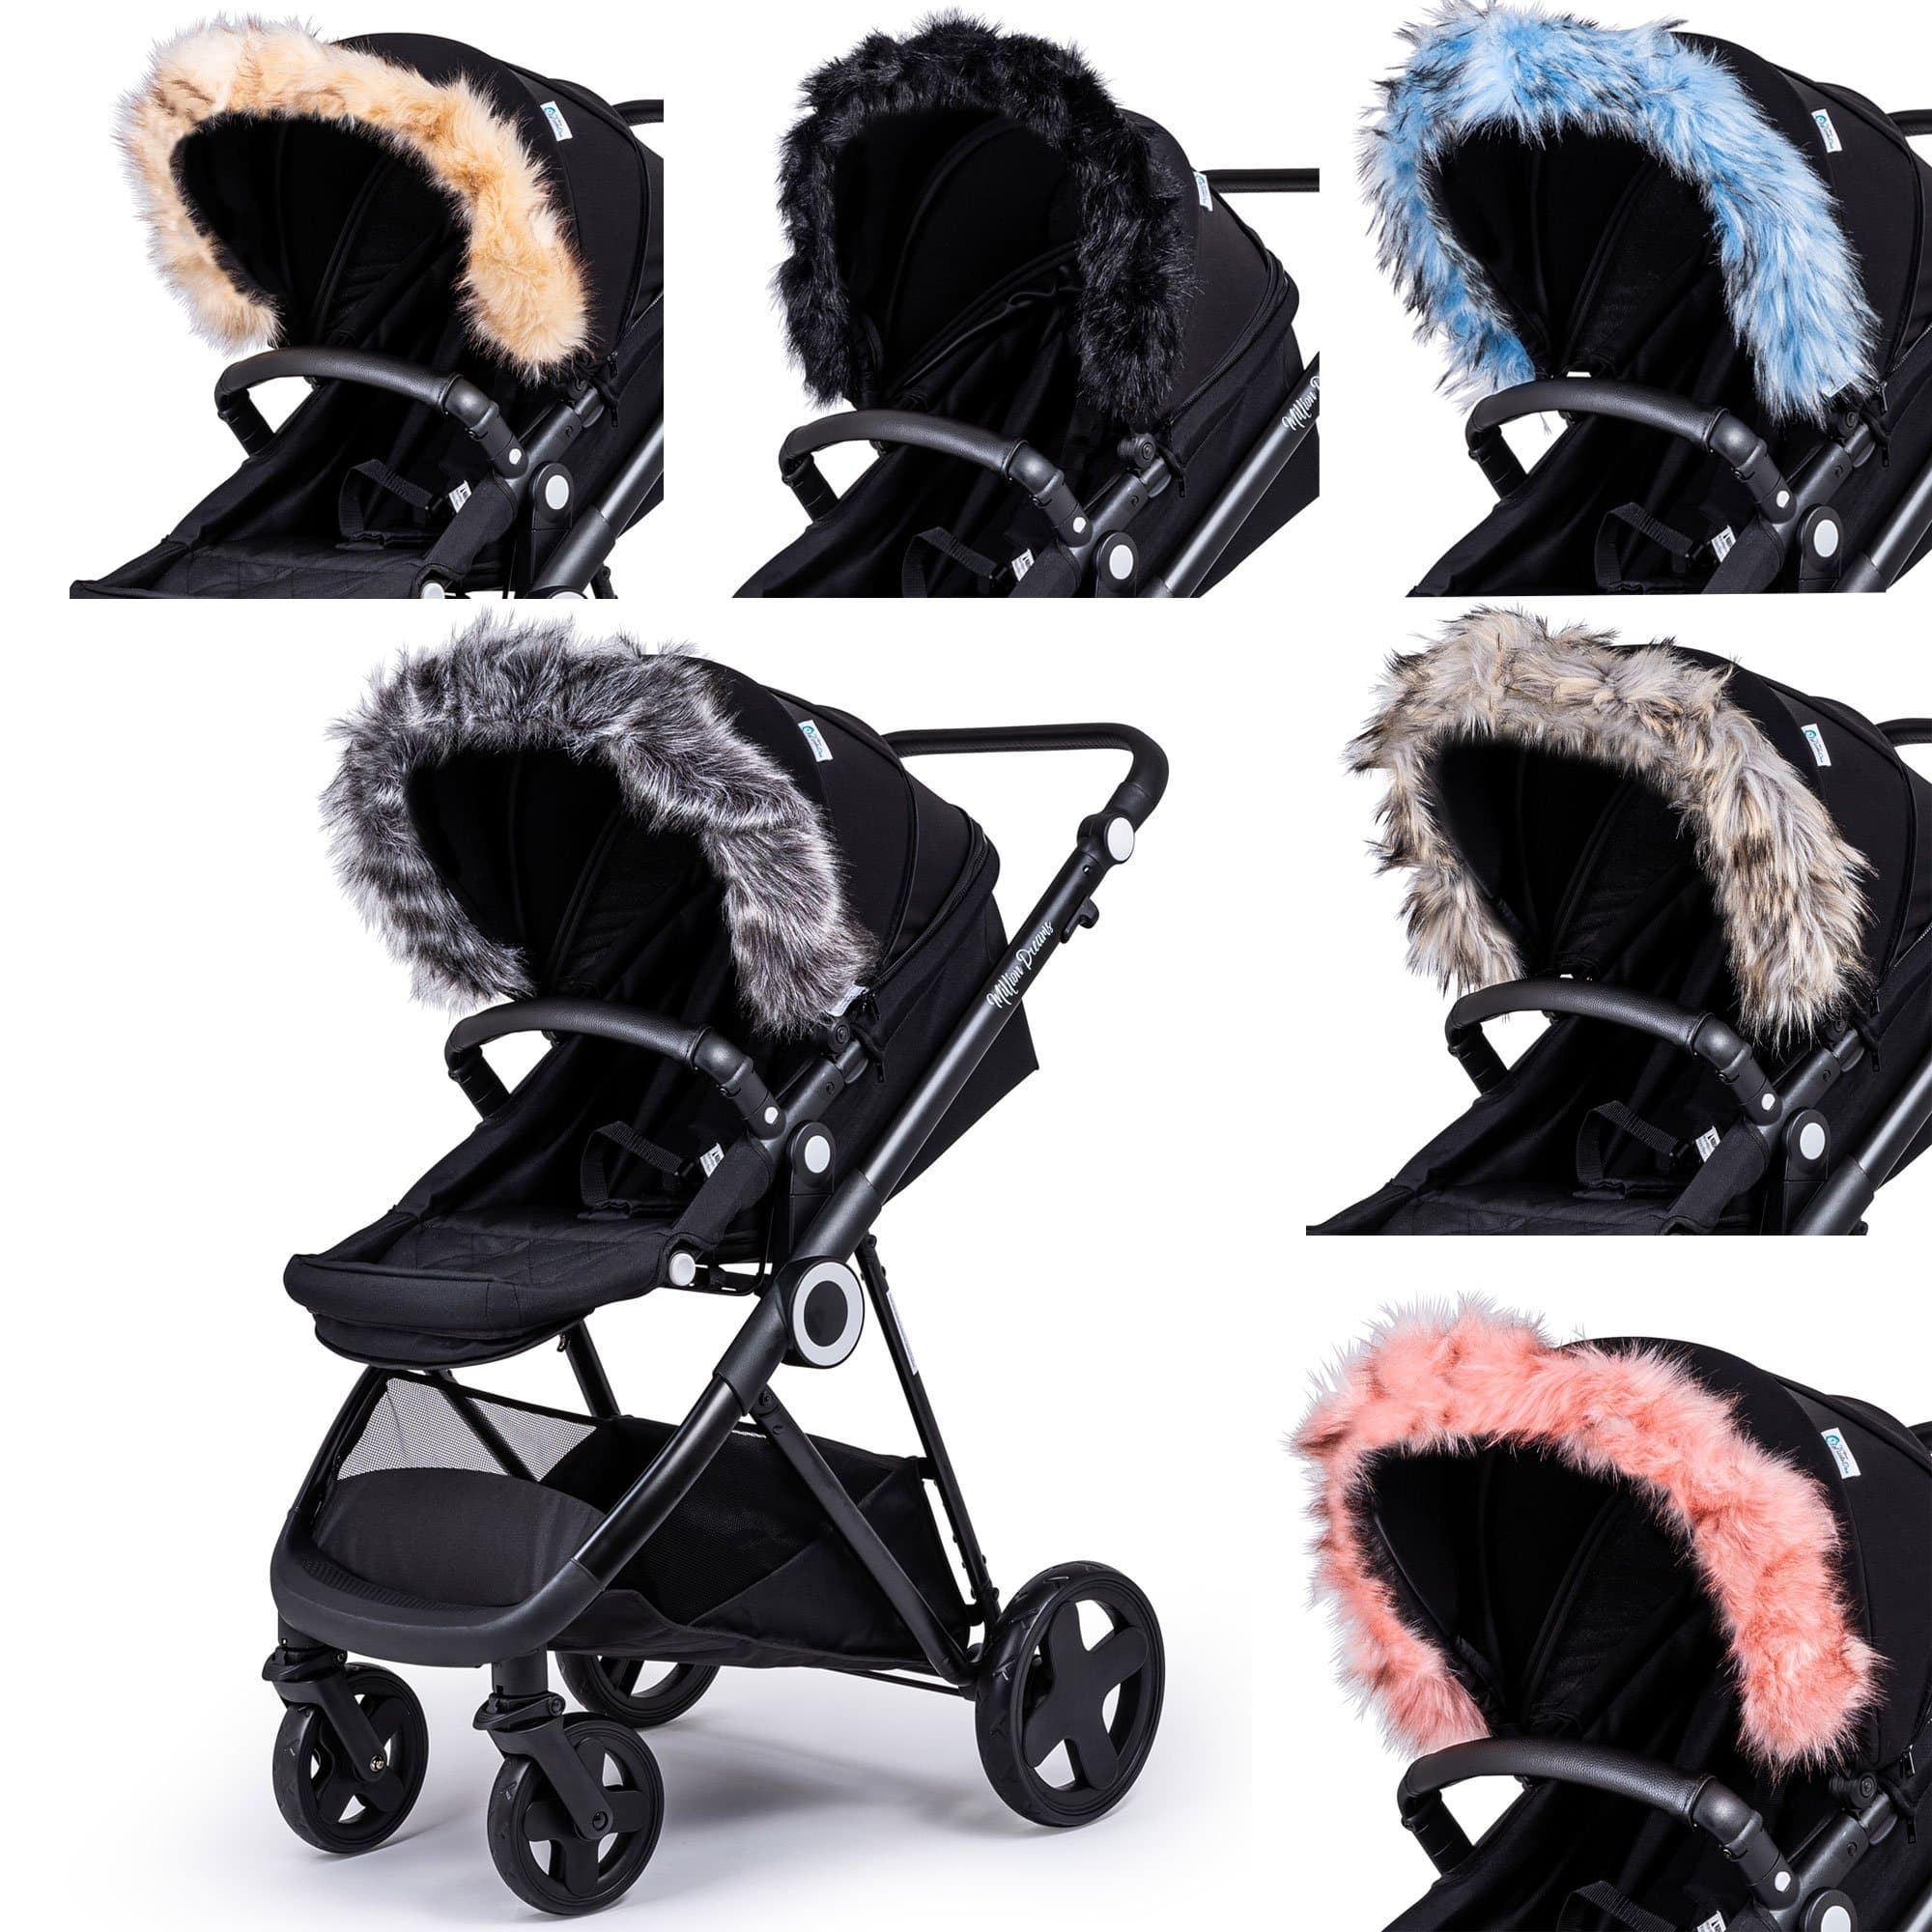 Pram Fur Hood Trim Attachment for Pushchair Compatible with Mountain Buggy - For Your Little One